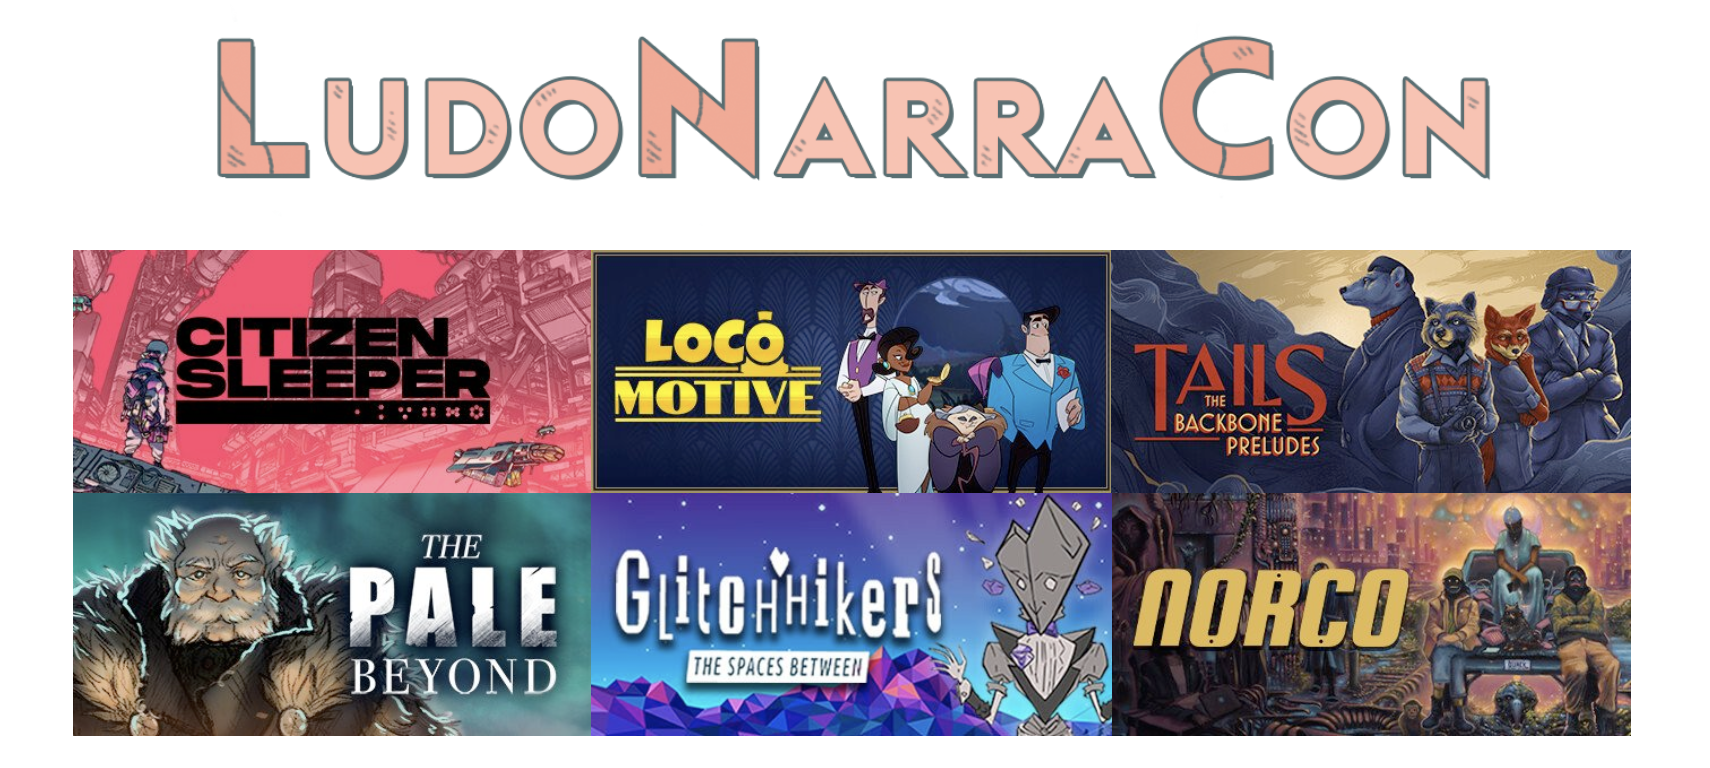 LudoNarraCon logo on top and six game posters below it for Citizen Sleeper, Tails: The Backbone Preludes, Loco Motive, NORCO and Glitchhikers: The Spaces Between, and The Pale Beyond